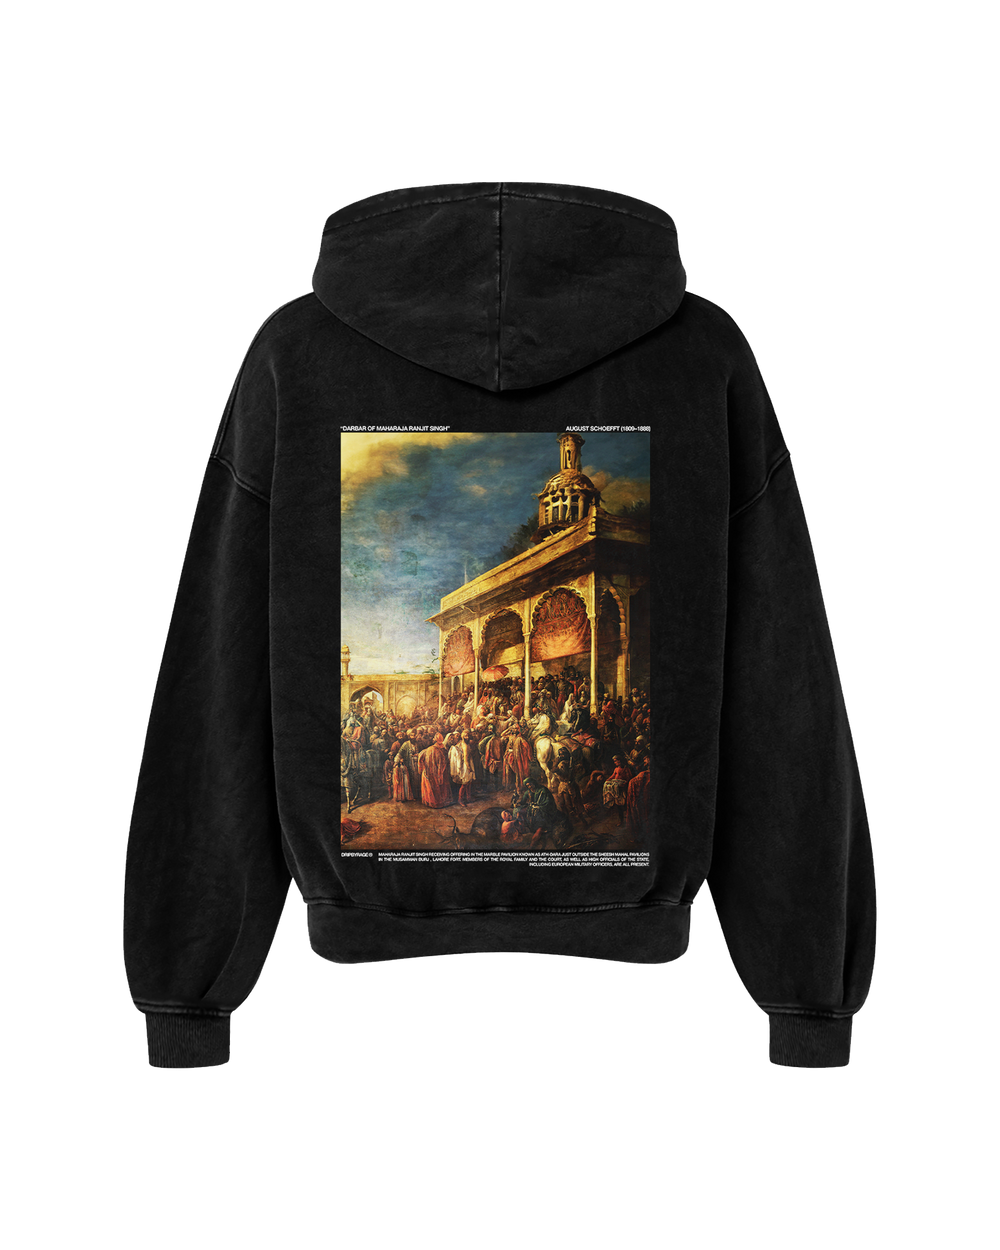 COURT OF LAHORE OVERSIZED FADED HOODIE BLACK